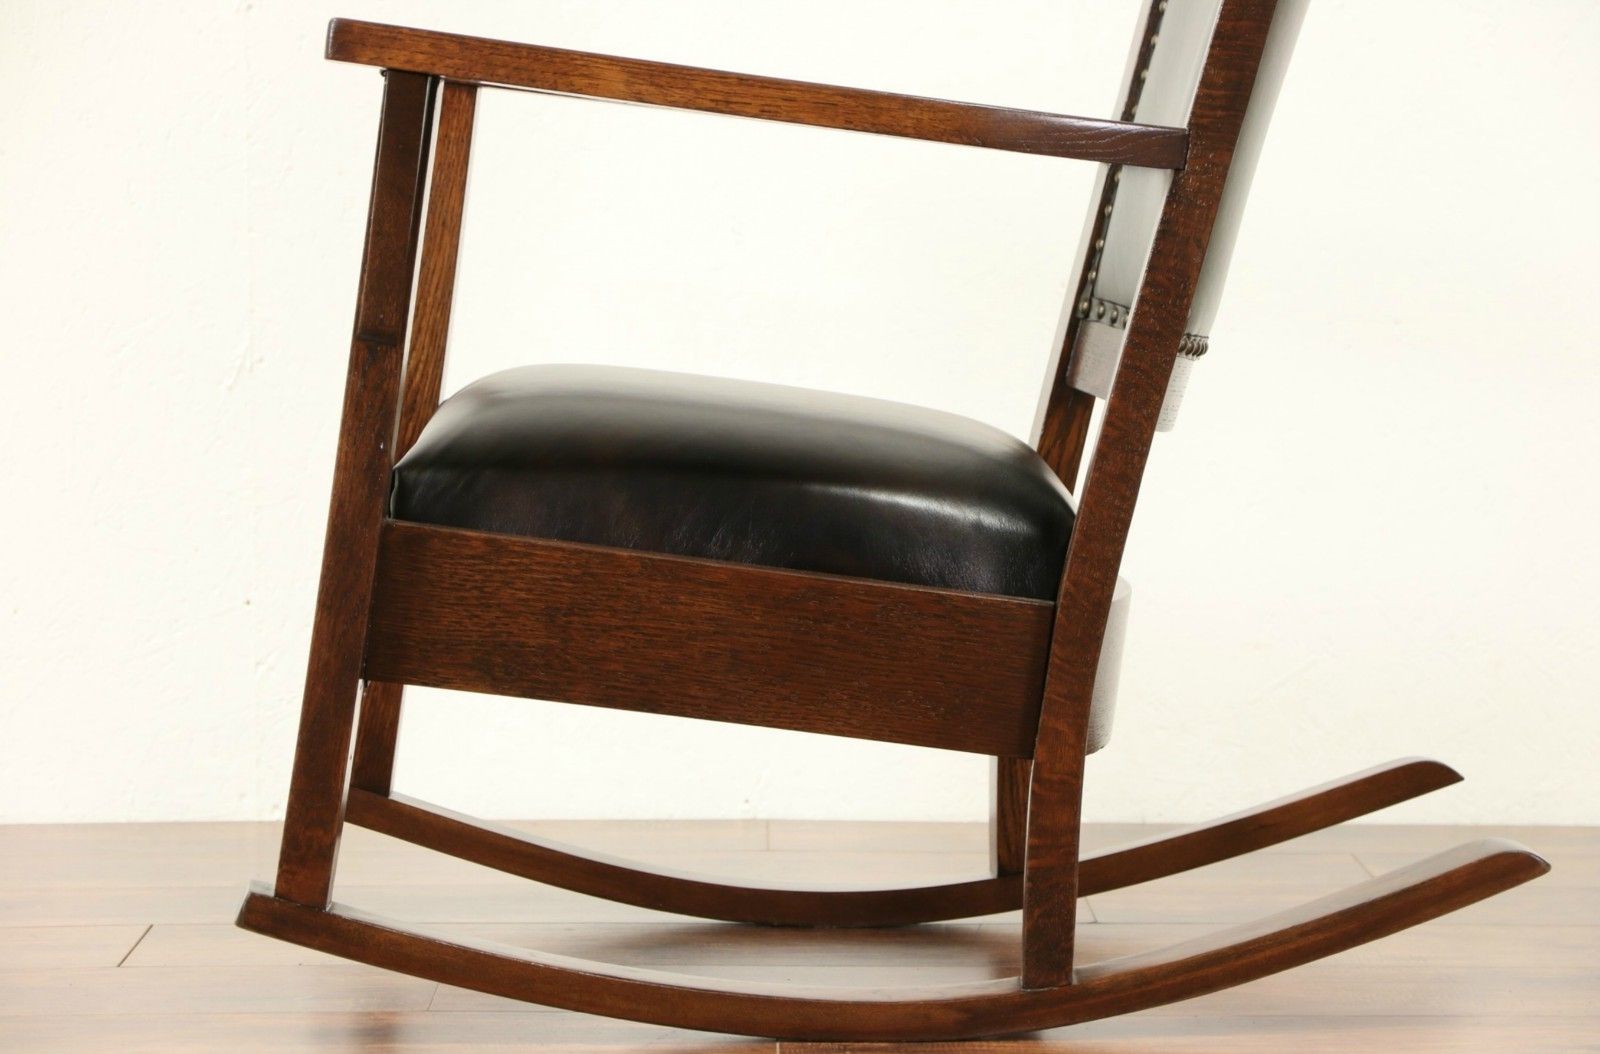 Antique Rocking Chairs For 2019 Sold – Arts & Crafts Mission Oak 1910 Antique Rocking Chair, New (View 1 of 20)